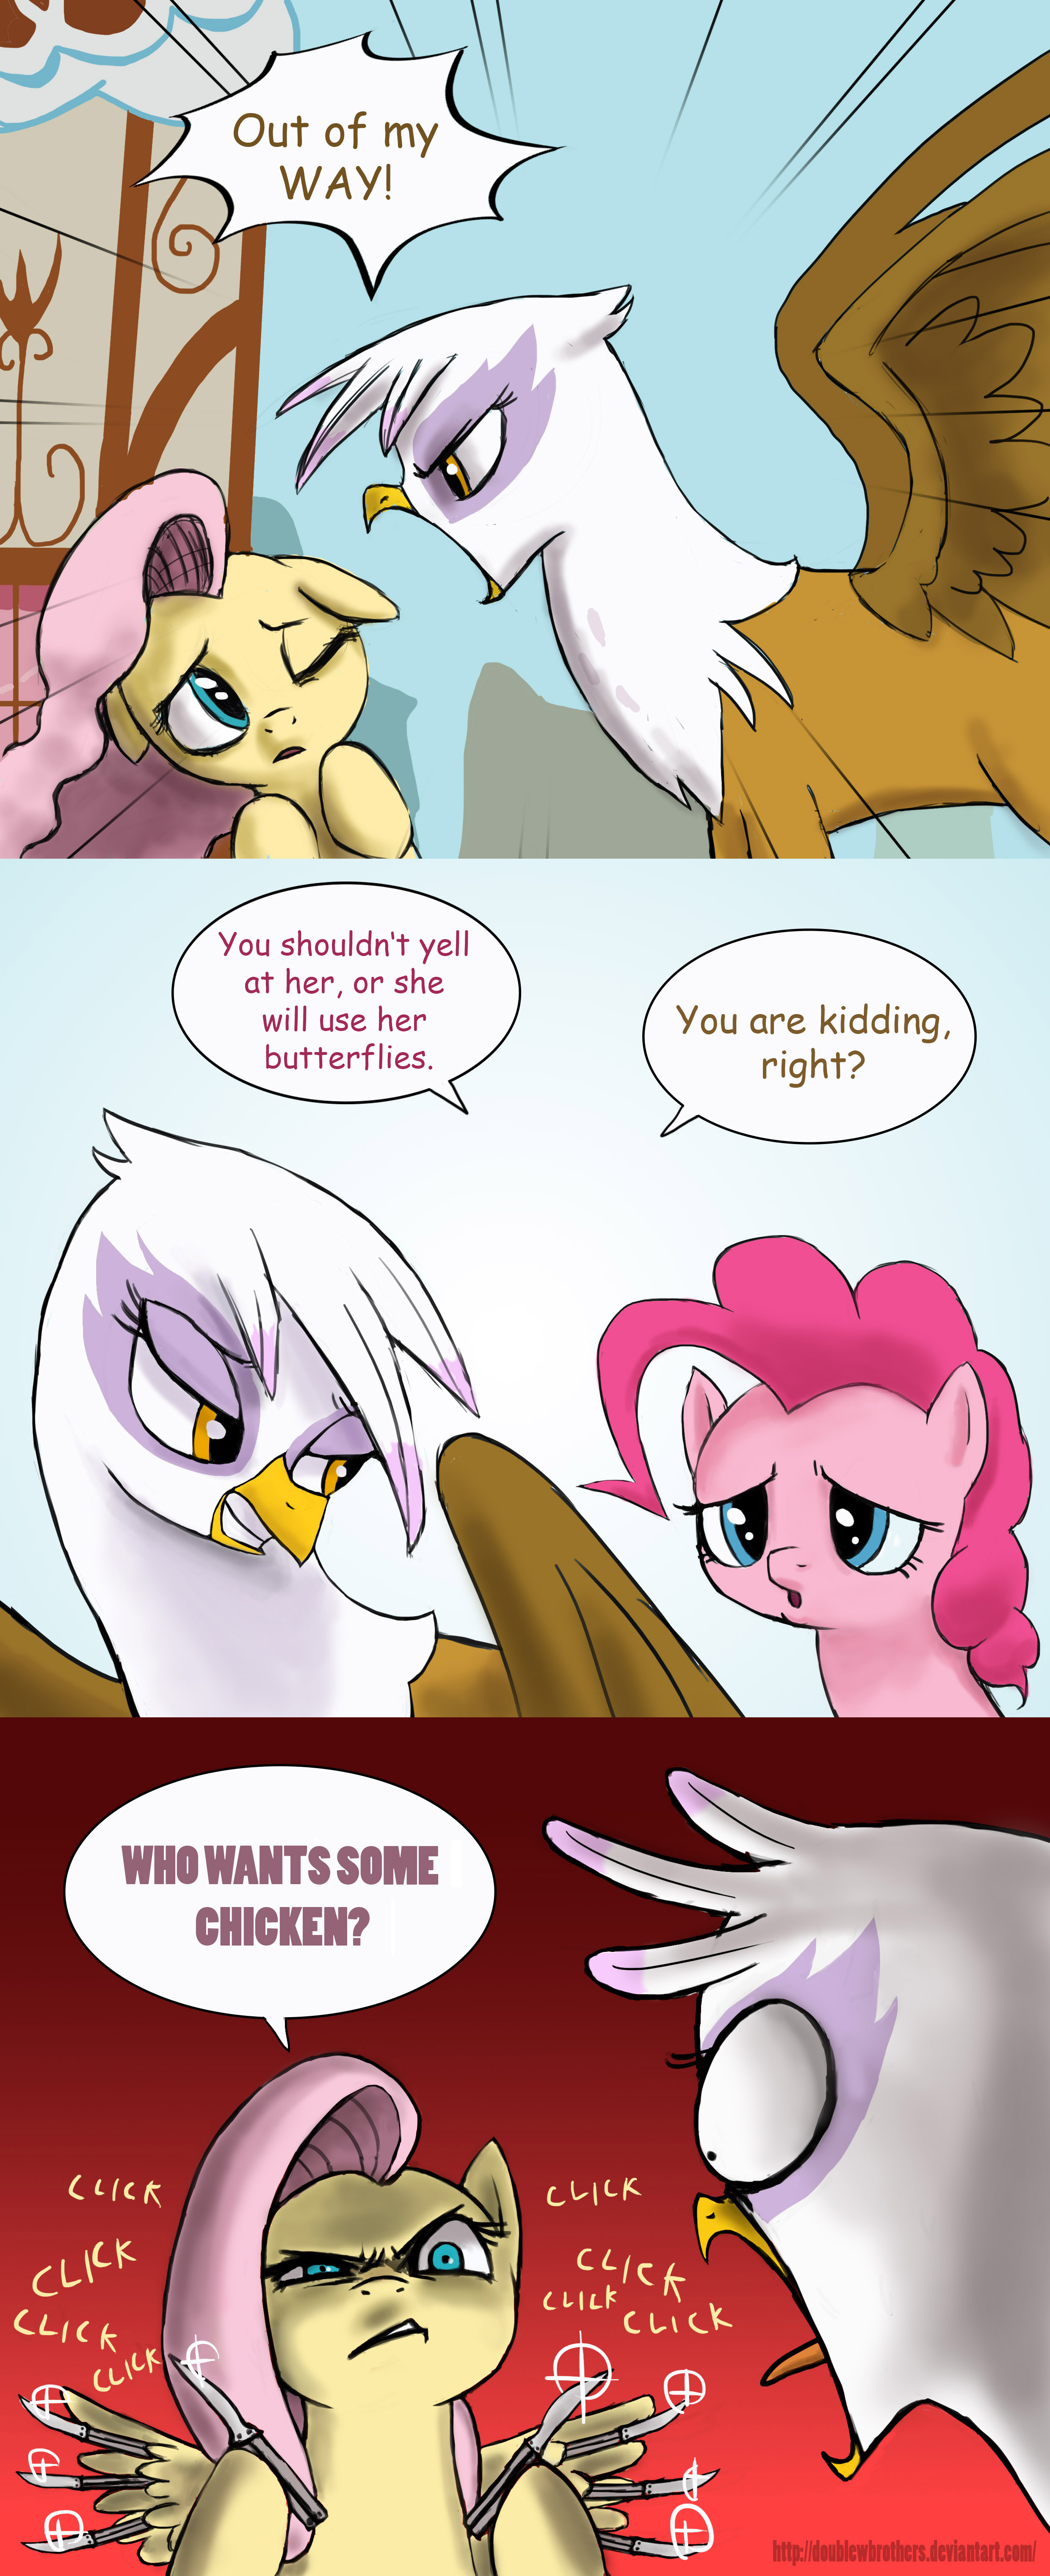 griffons_beware_by_doublewbrothers-d62xr